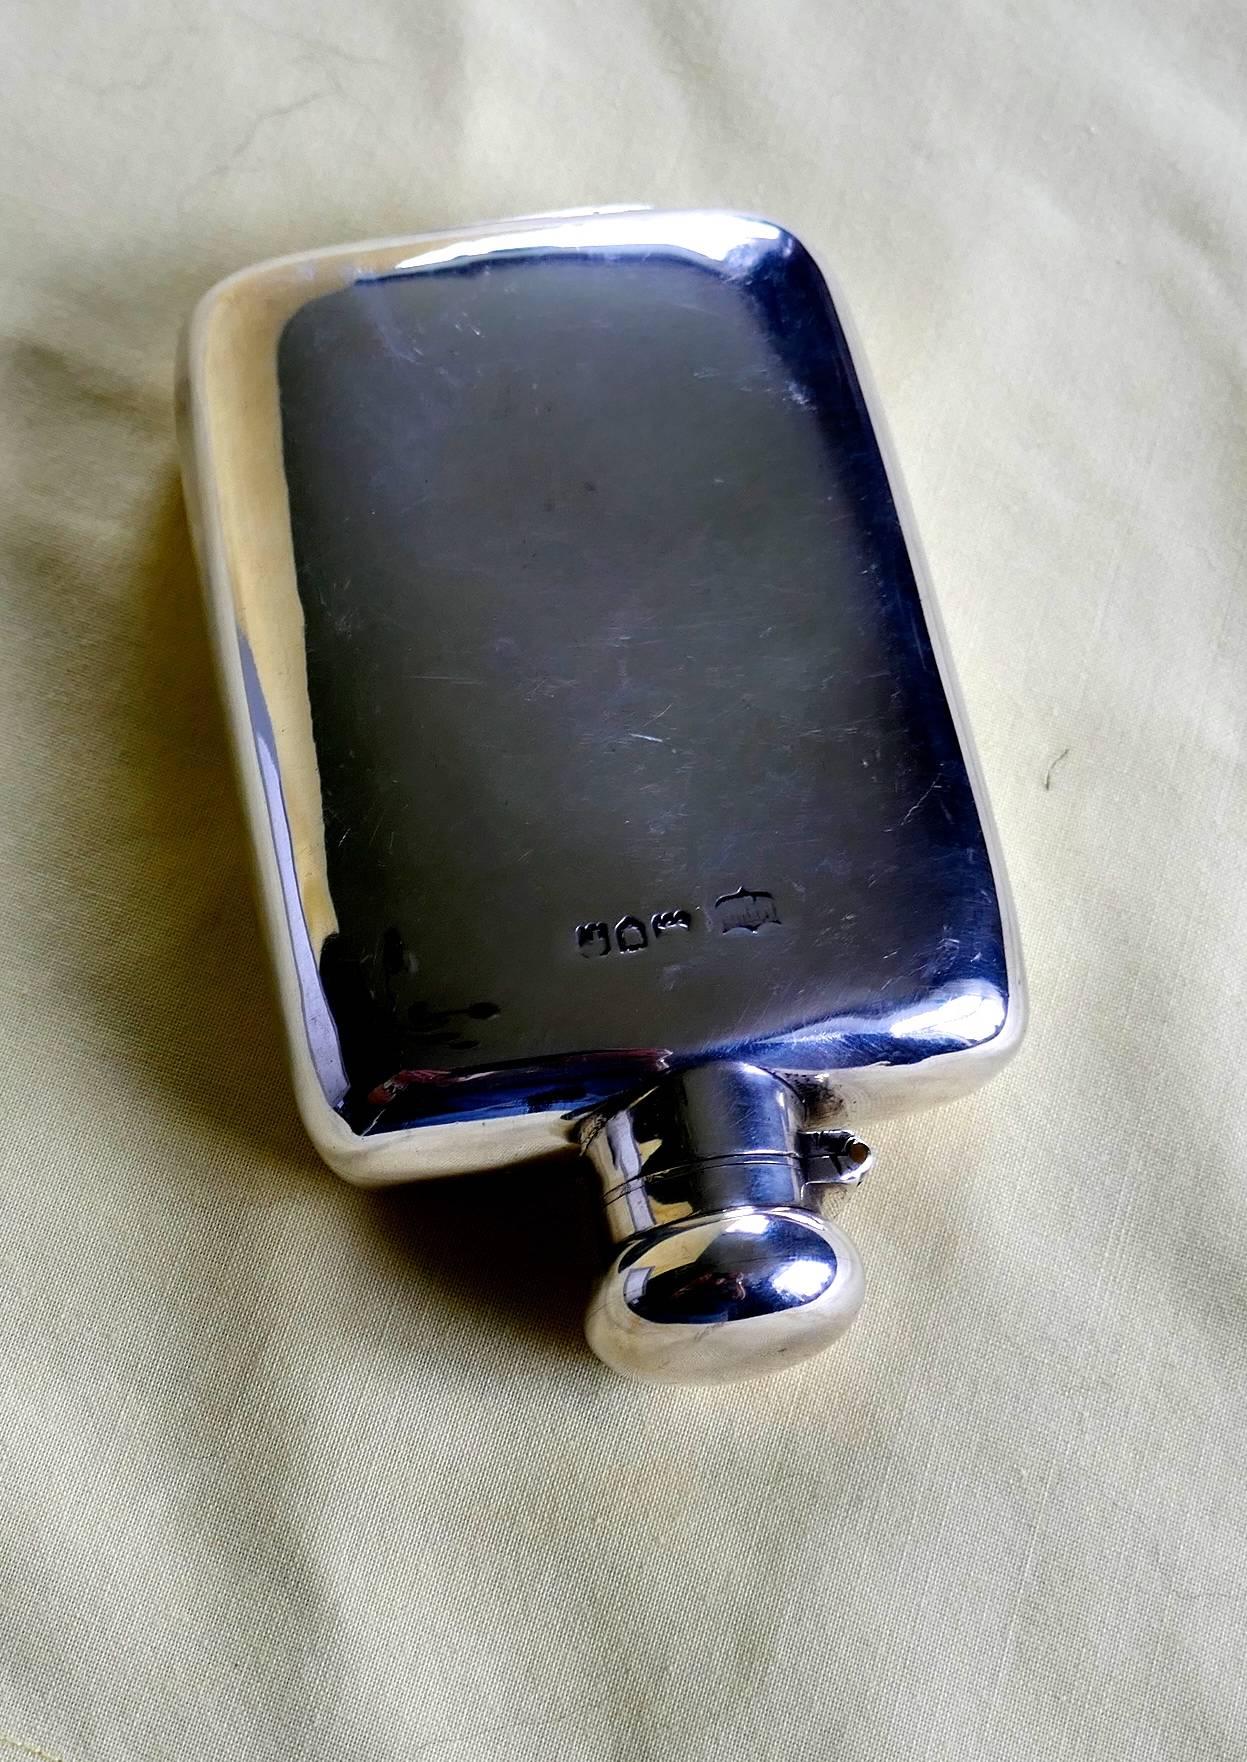 Silver hallmarked hip or pocket flask, 1906

A lovely piece the flask has a rounded shape with no sharp corners, making it ideal to keep in either a breast or hip pocket, the lid is hinged with a screw grip.

The flask is a very nice piece so